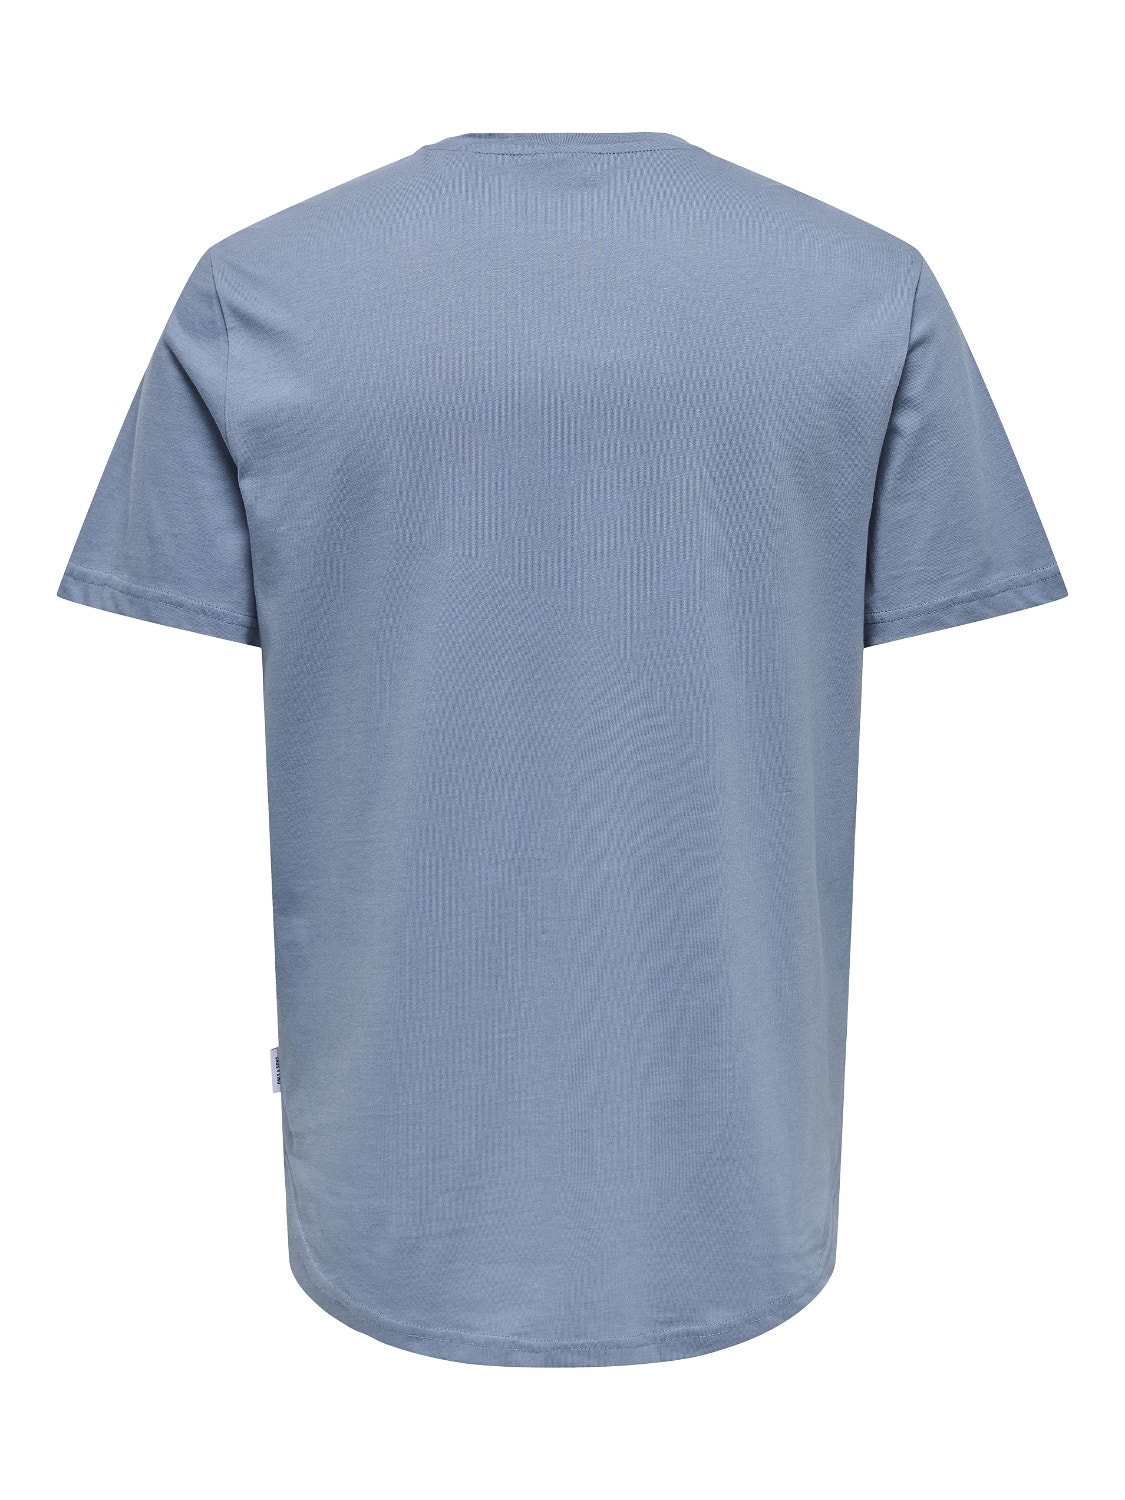 ONLY & SONS Long Line Fit Round Neck T-Shirt -Flint Stone - 22002973